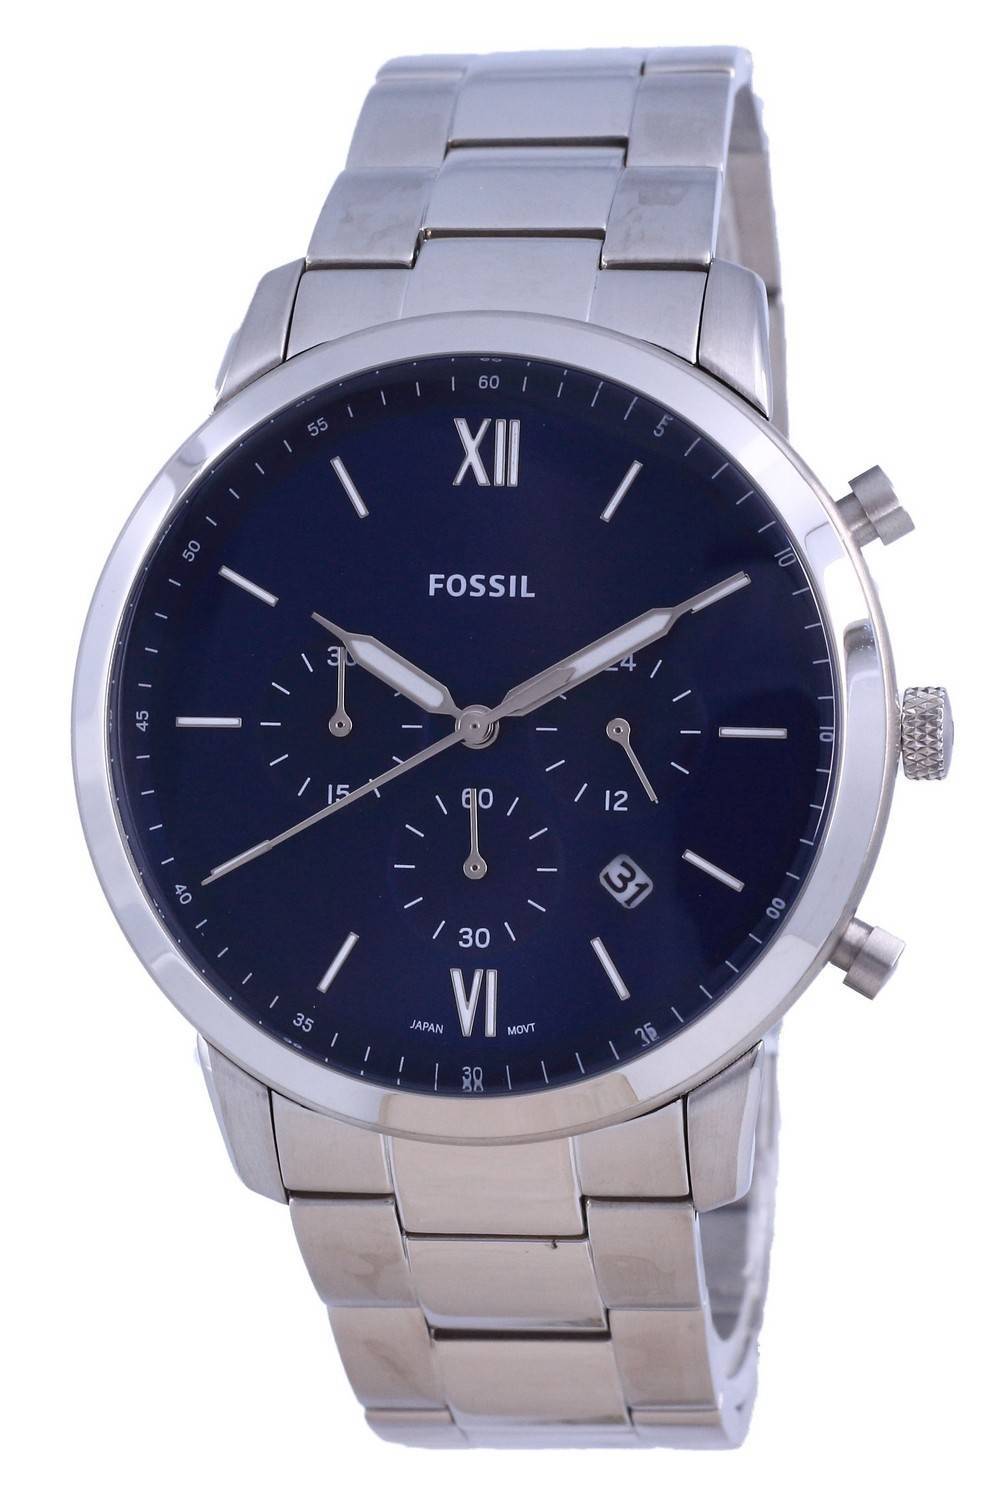 Discount Mens Fossil Watches On Sale Online